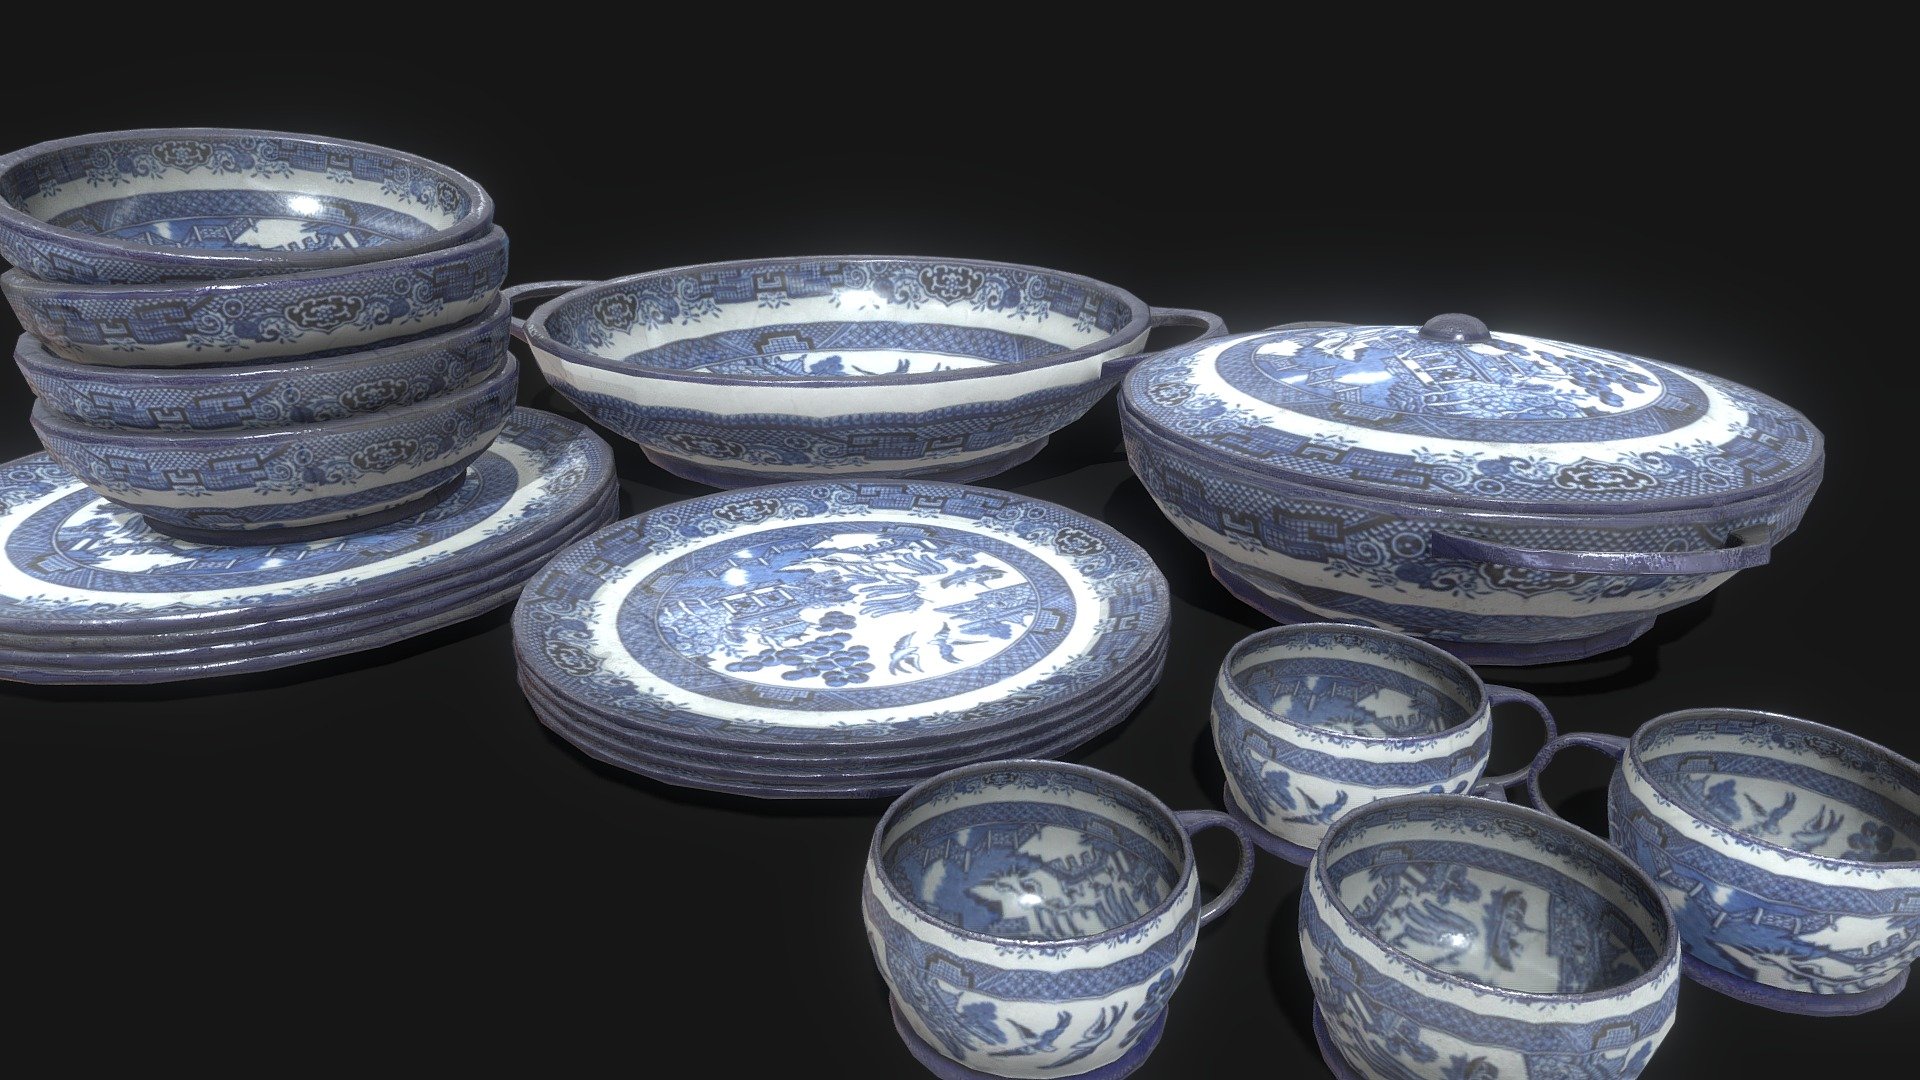 A set of dusty Old China Dishes!

Designed for games in Low-poly PBR including Albedo, Normal, Metallic, AO, and Roughness PNG textures. All models share one 4K Texture map.

11520 Triangles (Total of all objects in scene) 3d model